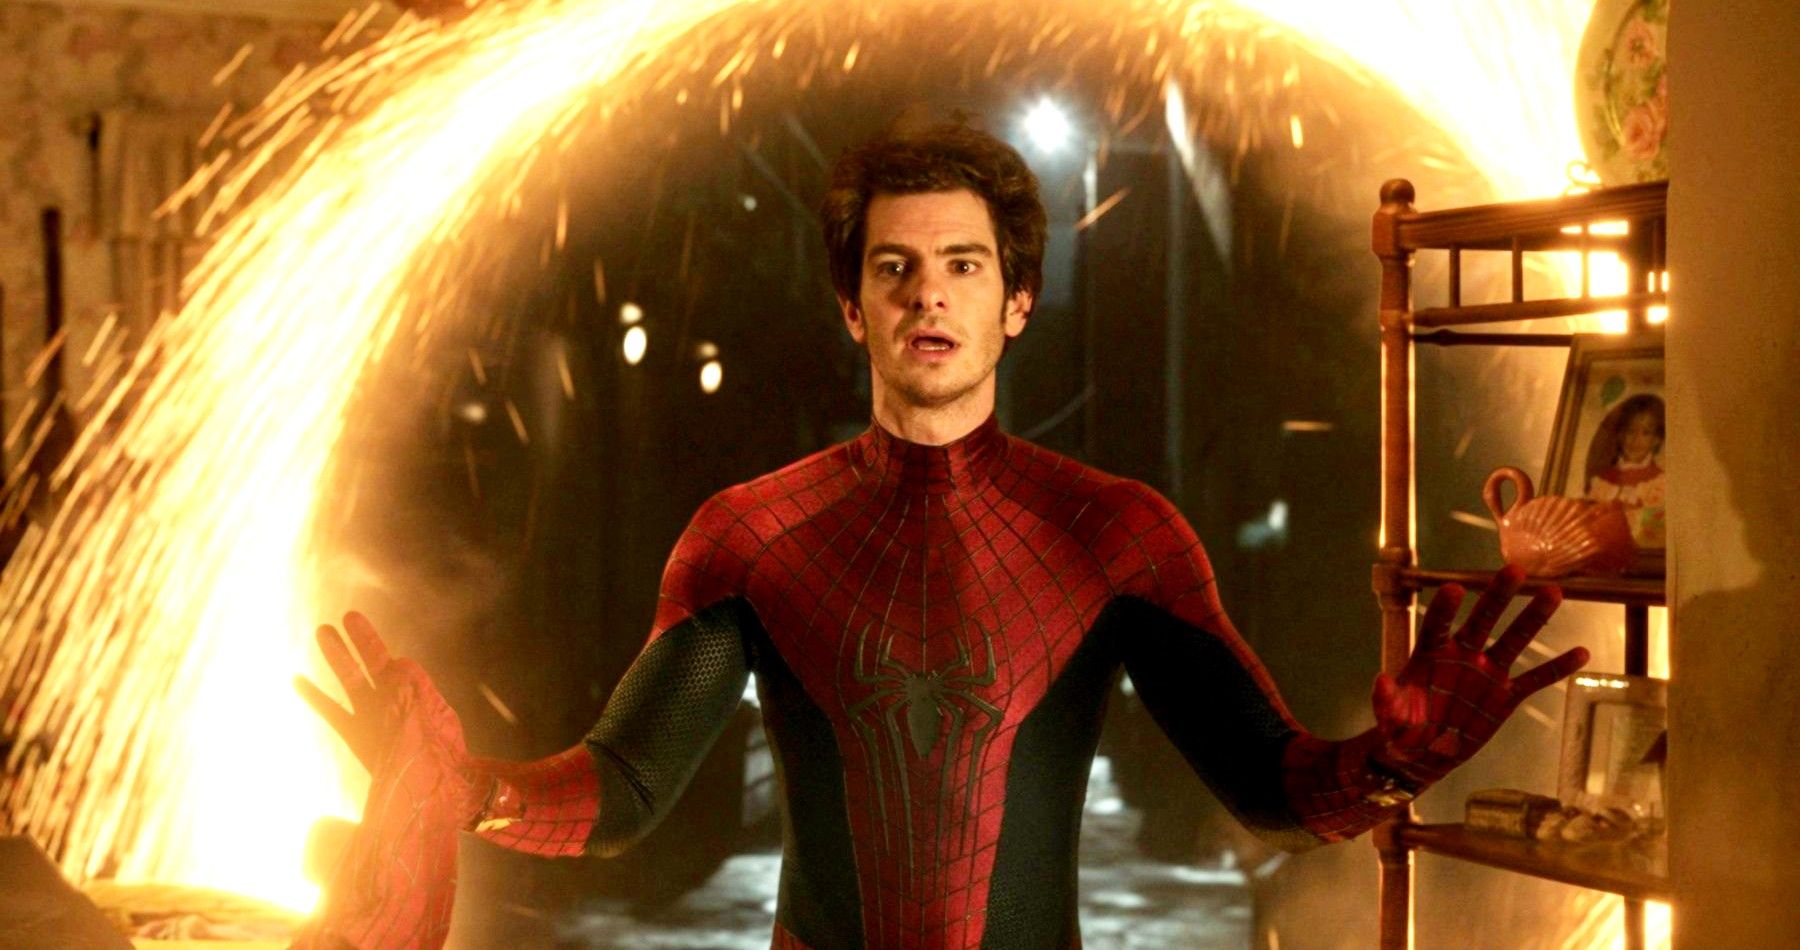 Andrew Garfield's Spider-Man comes out of the portal in Spider-Man: No Way Home